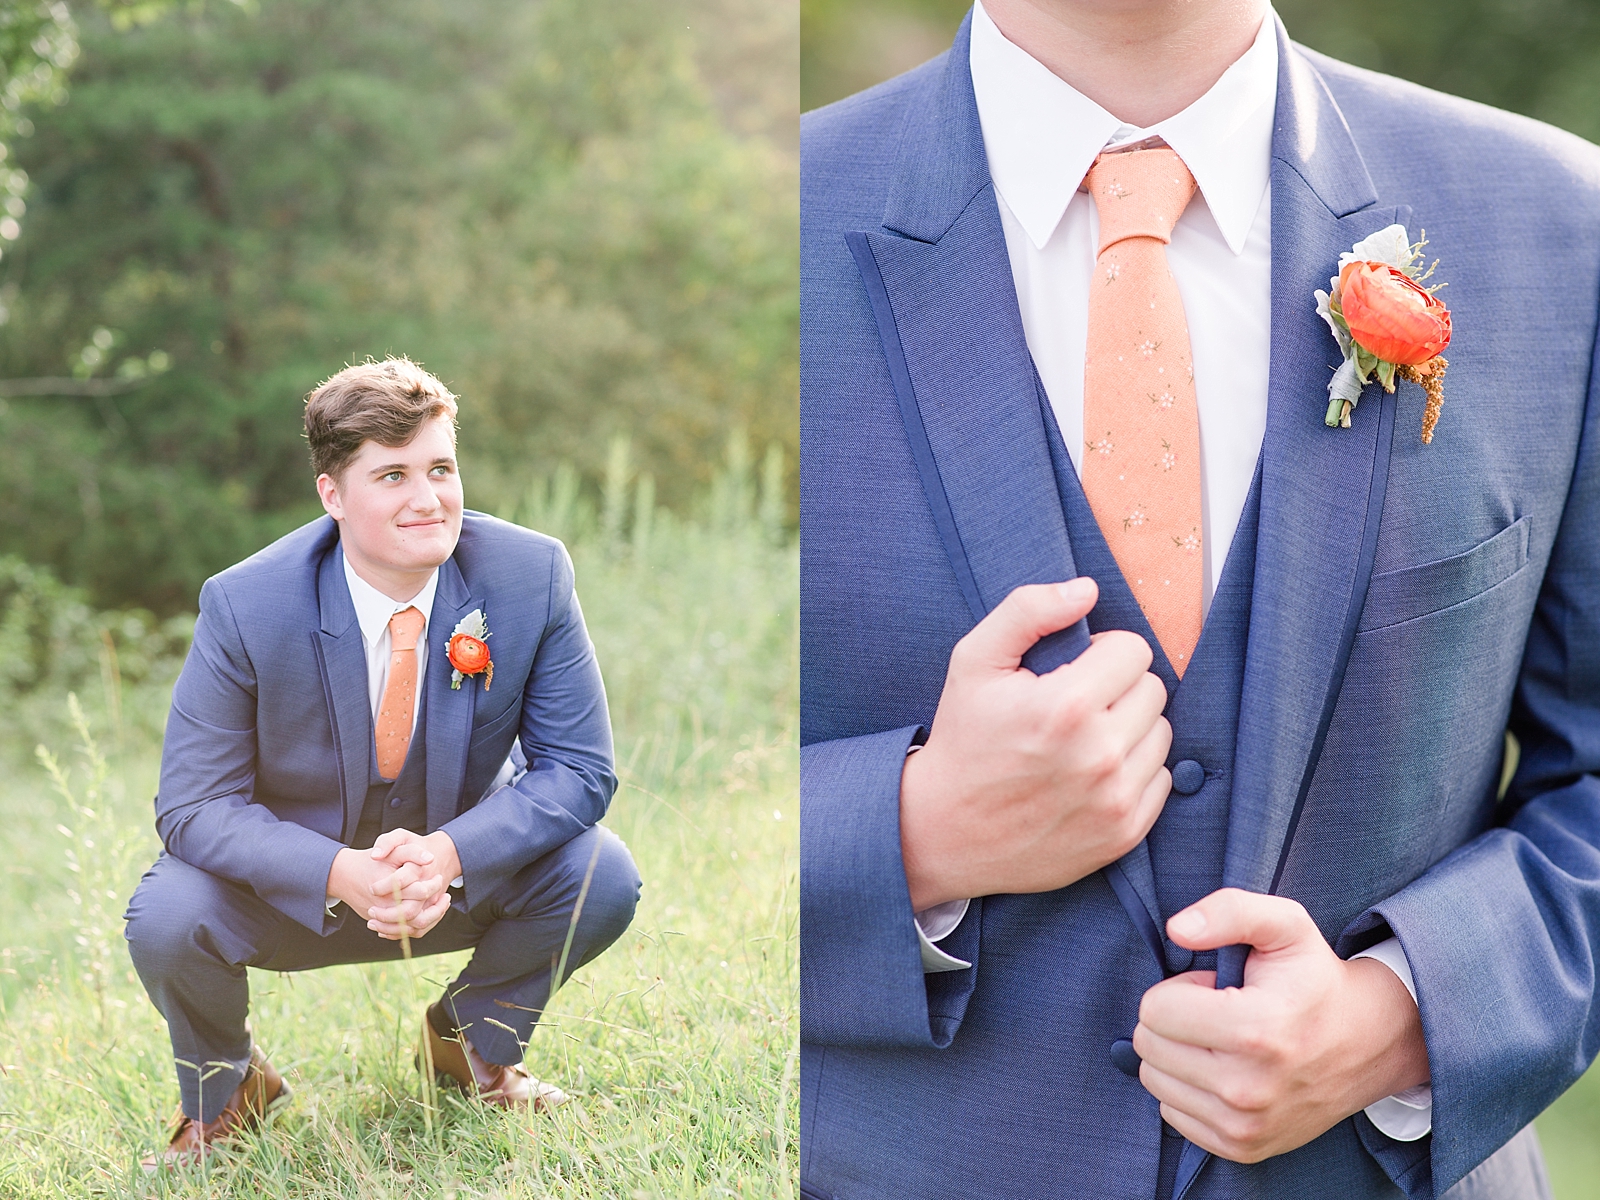 Chestnut Ridge Wedding groom portraits and detail of groom holding blue jacket with orange tie and boutonnière Photos